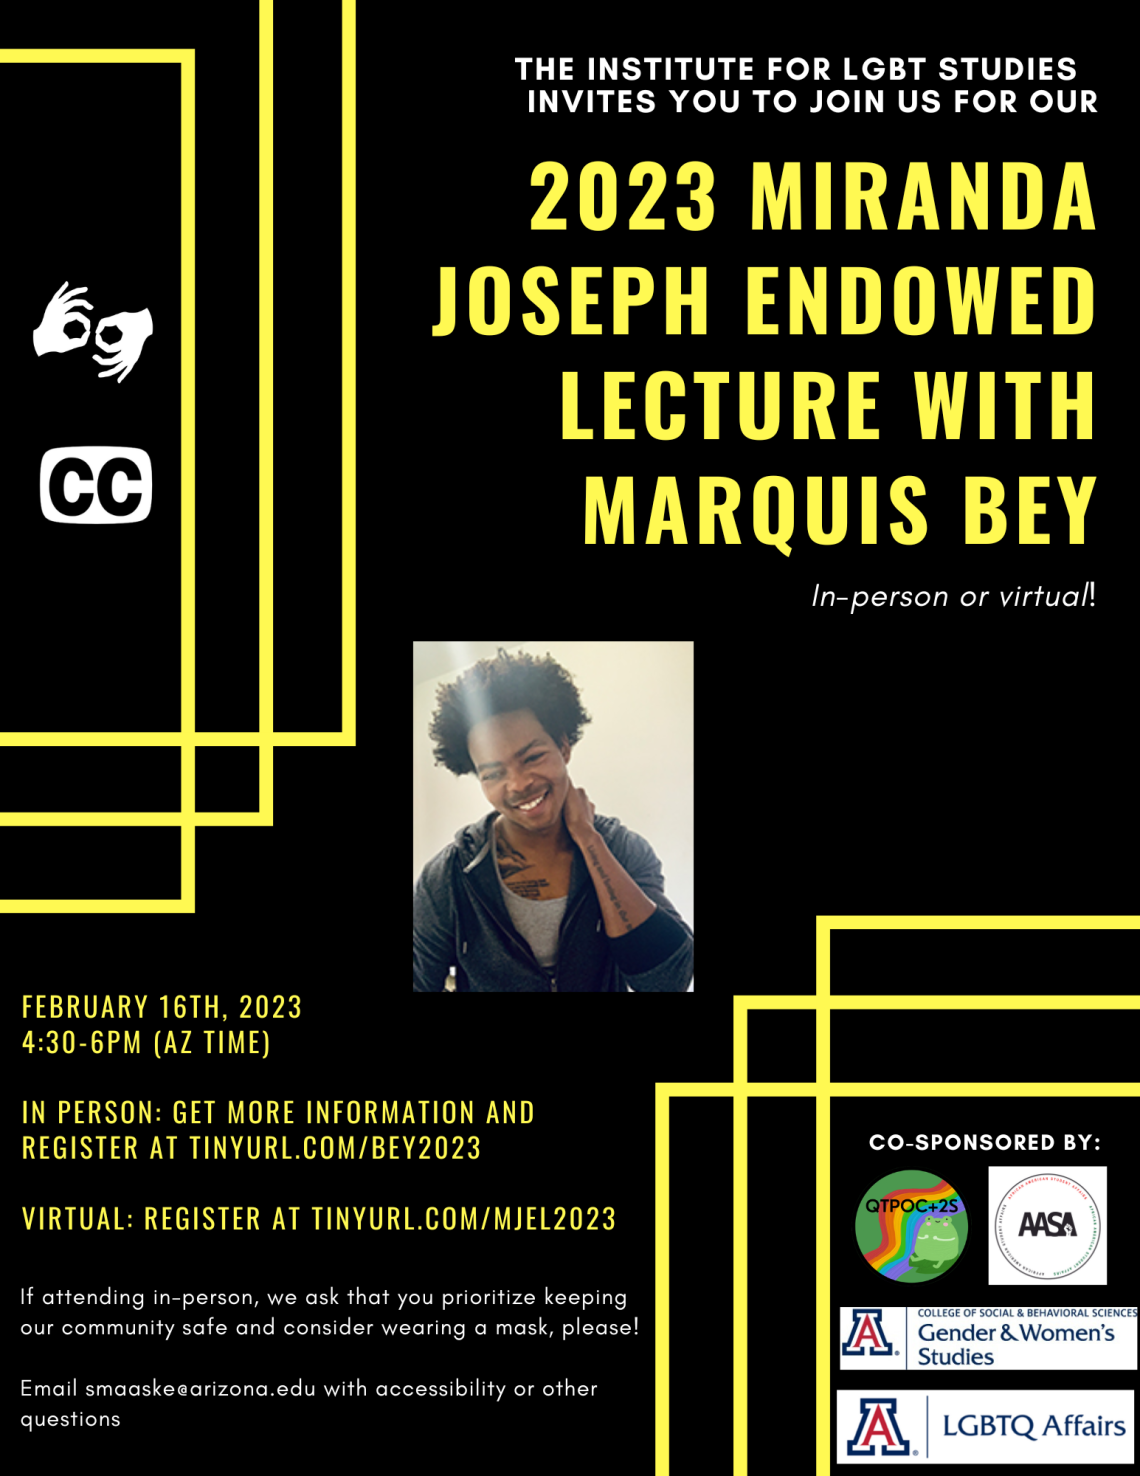 Black background with bright yellow overlaying rectangle outlines on the corners. White and bright yellow text reads: “The Institute for LGBT Studies invites you to join us for our 2023 Miranda Joseph Endowed Lecture with Marquis Bey: In-person or virtual! February 16th, 2023. 4:30-6pm (AZ Time). In person: get more information and register at tinyurl.com/Bey2023 Virtual: register at tinyurl.com/MJEL2023 